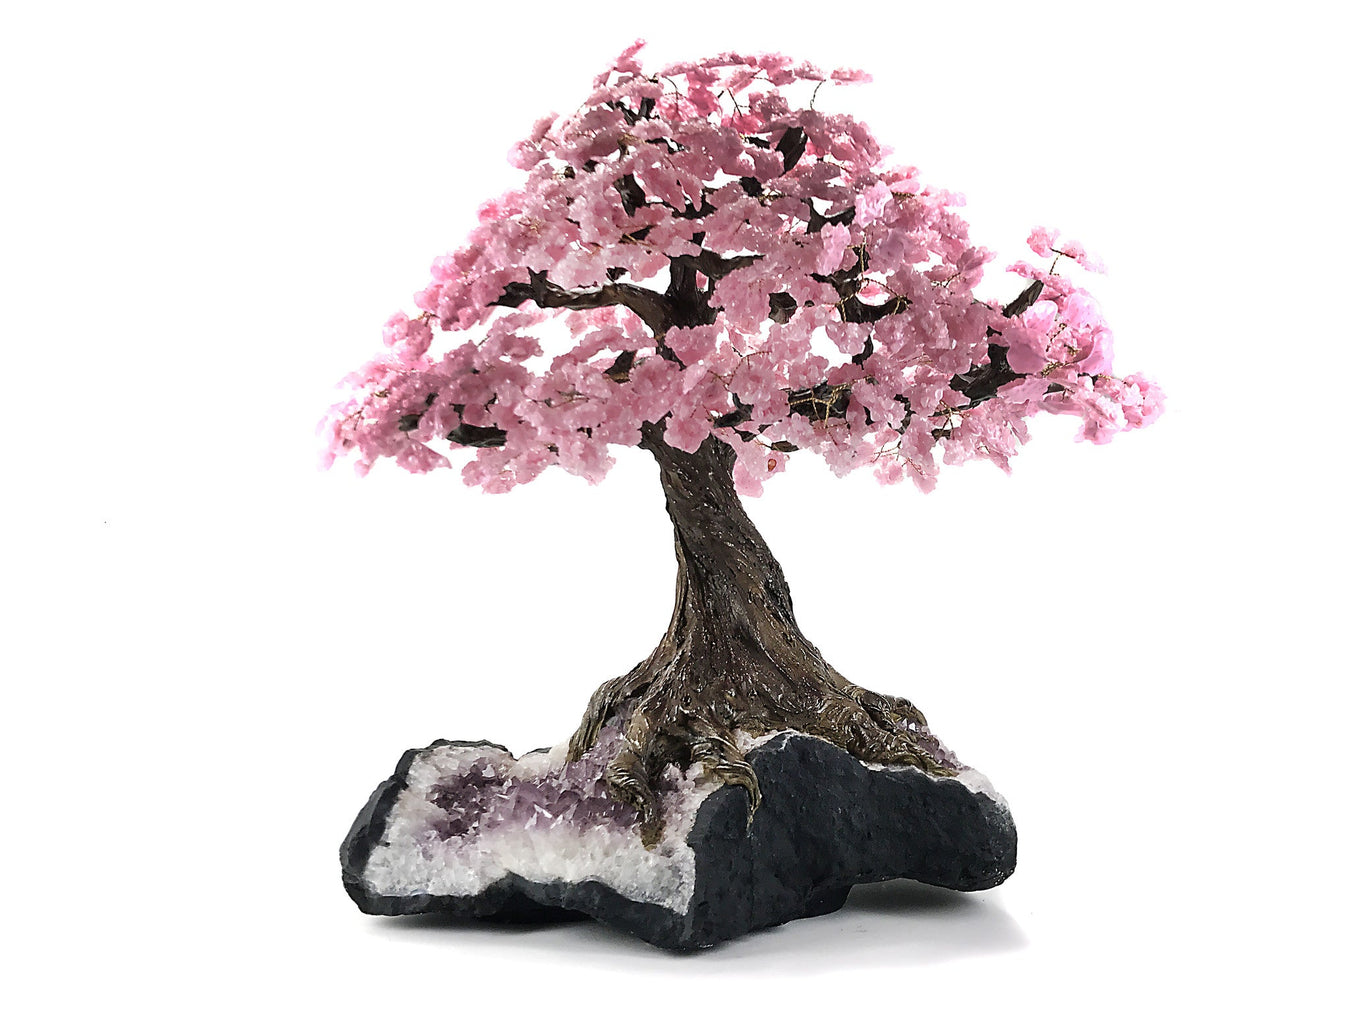 Gemstone Trees - By Price: Highest to Lowest